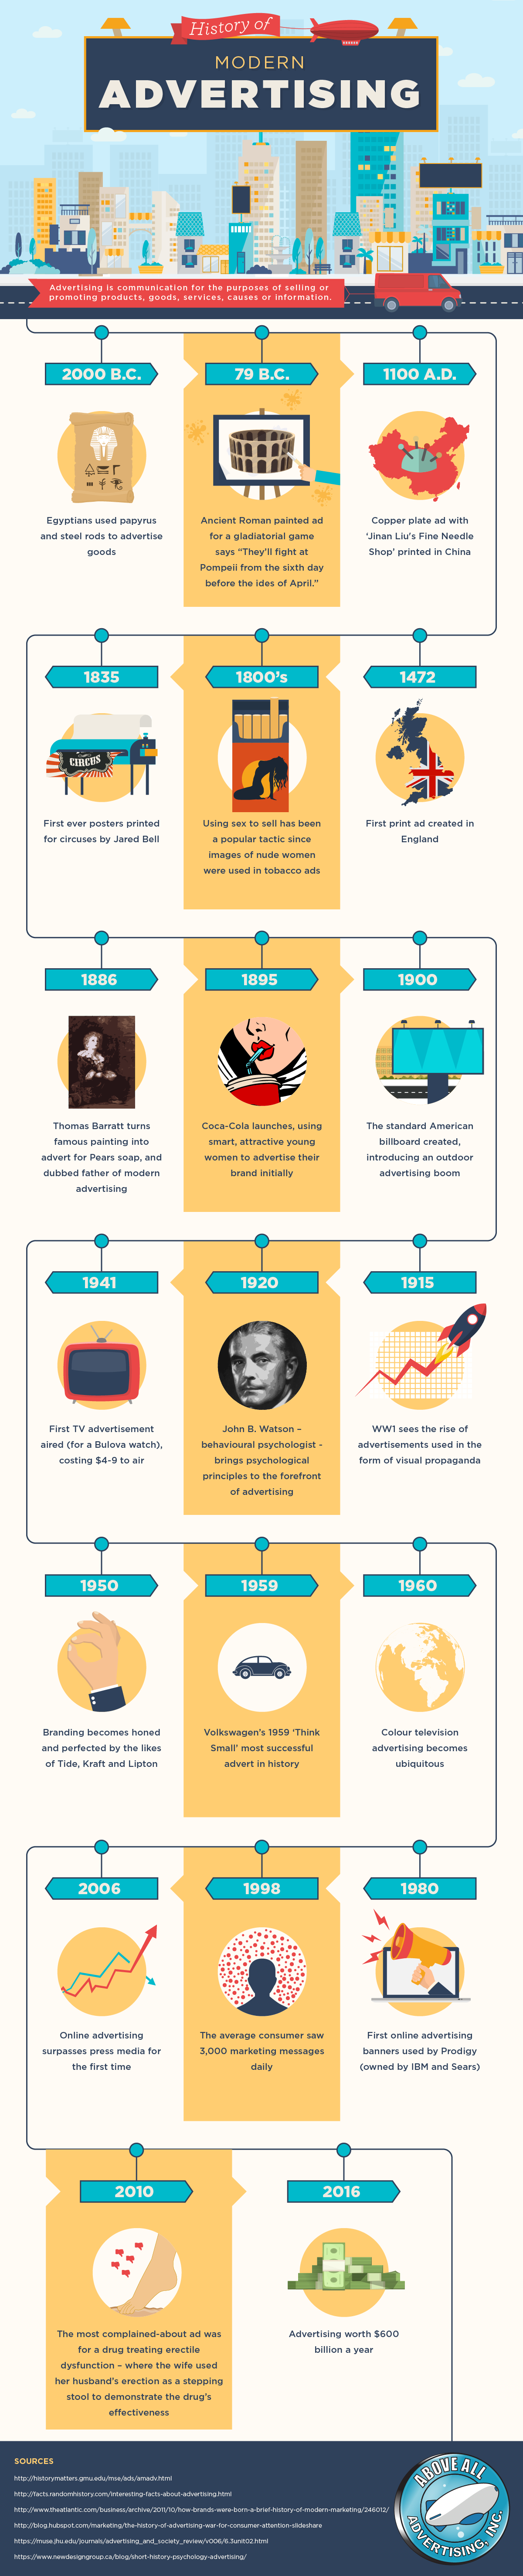 History Of Modern Adversting - #infographic